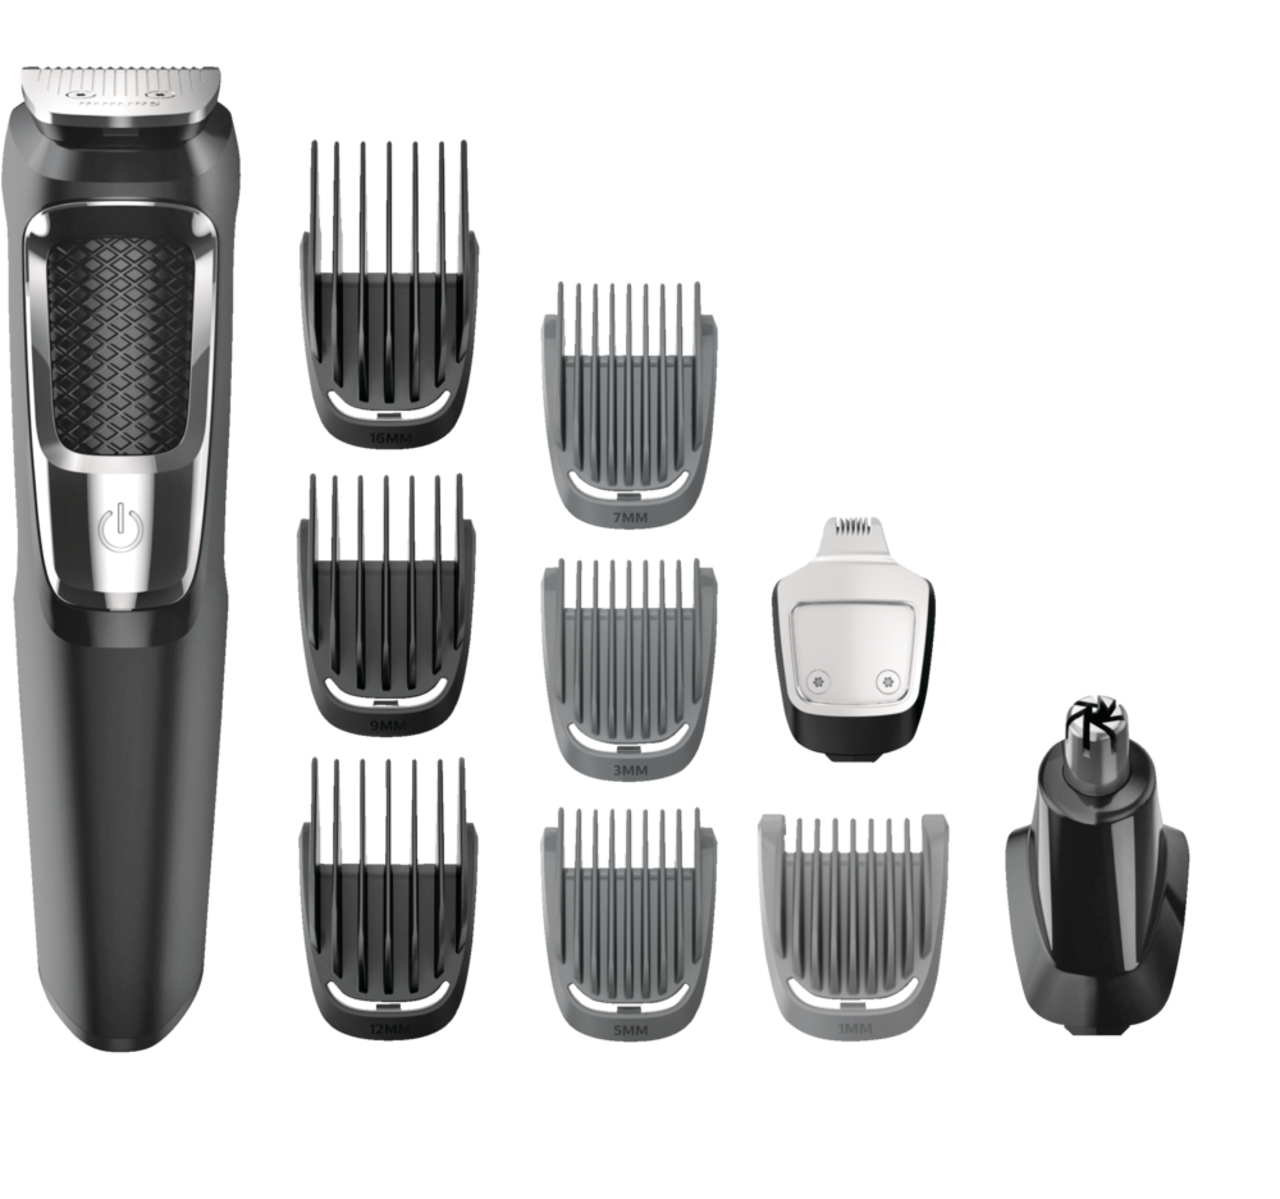  Philips Norelco Multigroomer All-in-One Trimmer Series 3000, 13  Piece Mens Grooming Kit, for Beard, Face, Nose, and Ear Hair Trimmer and  Hair Clipper, NO Blade Oil Needed, MG3750/60 : Beauty 